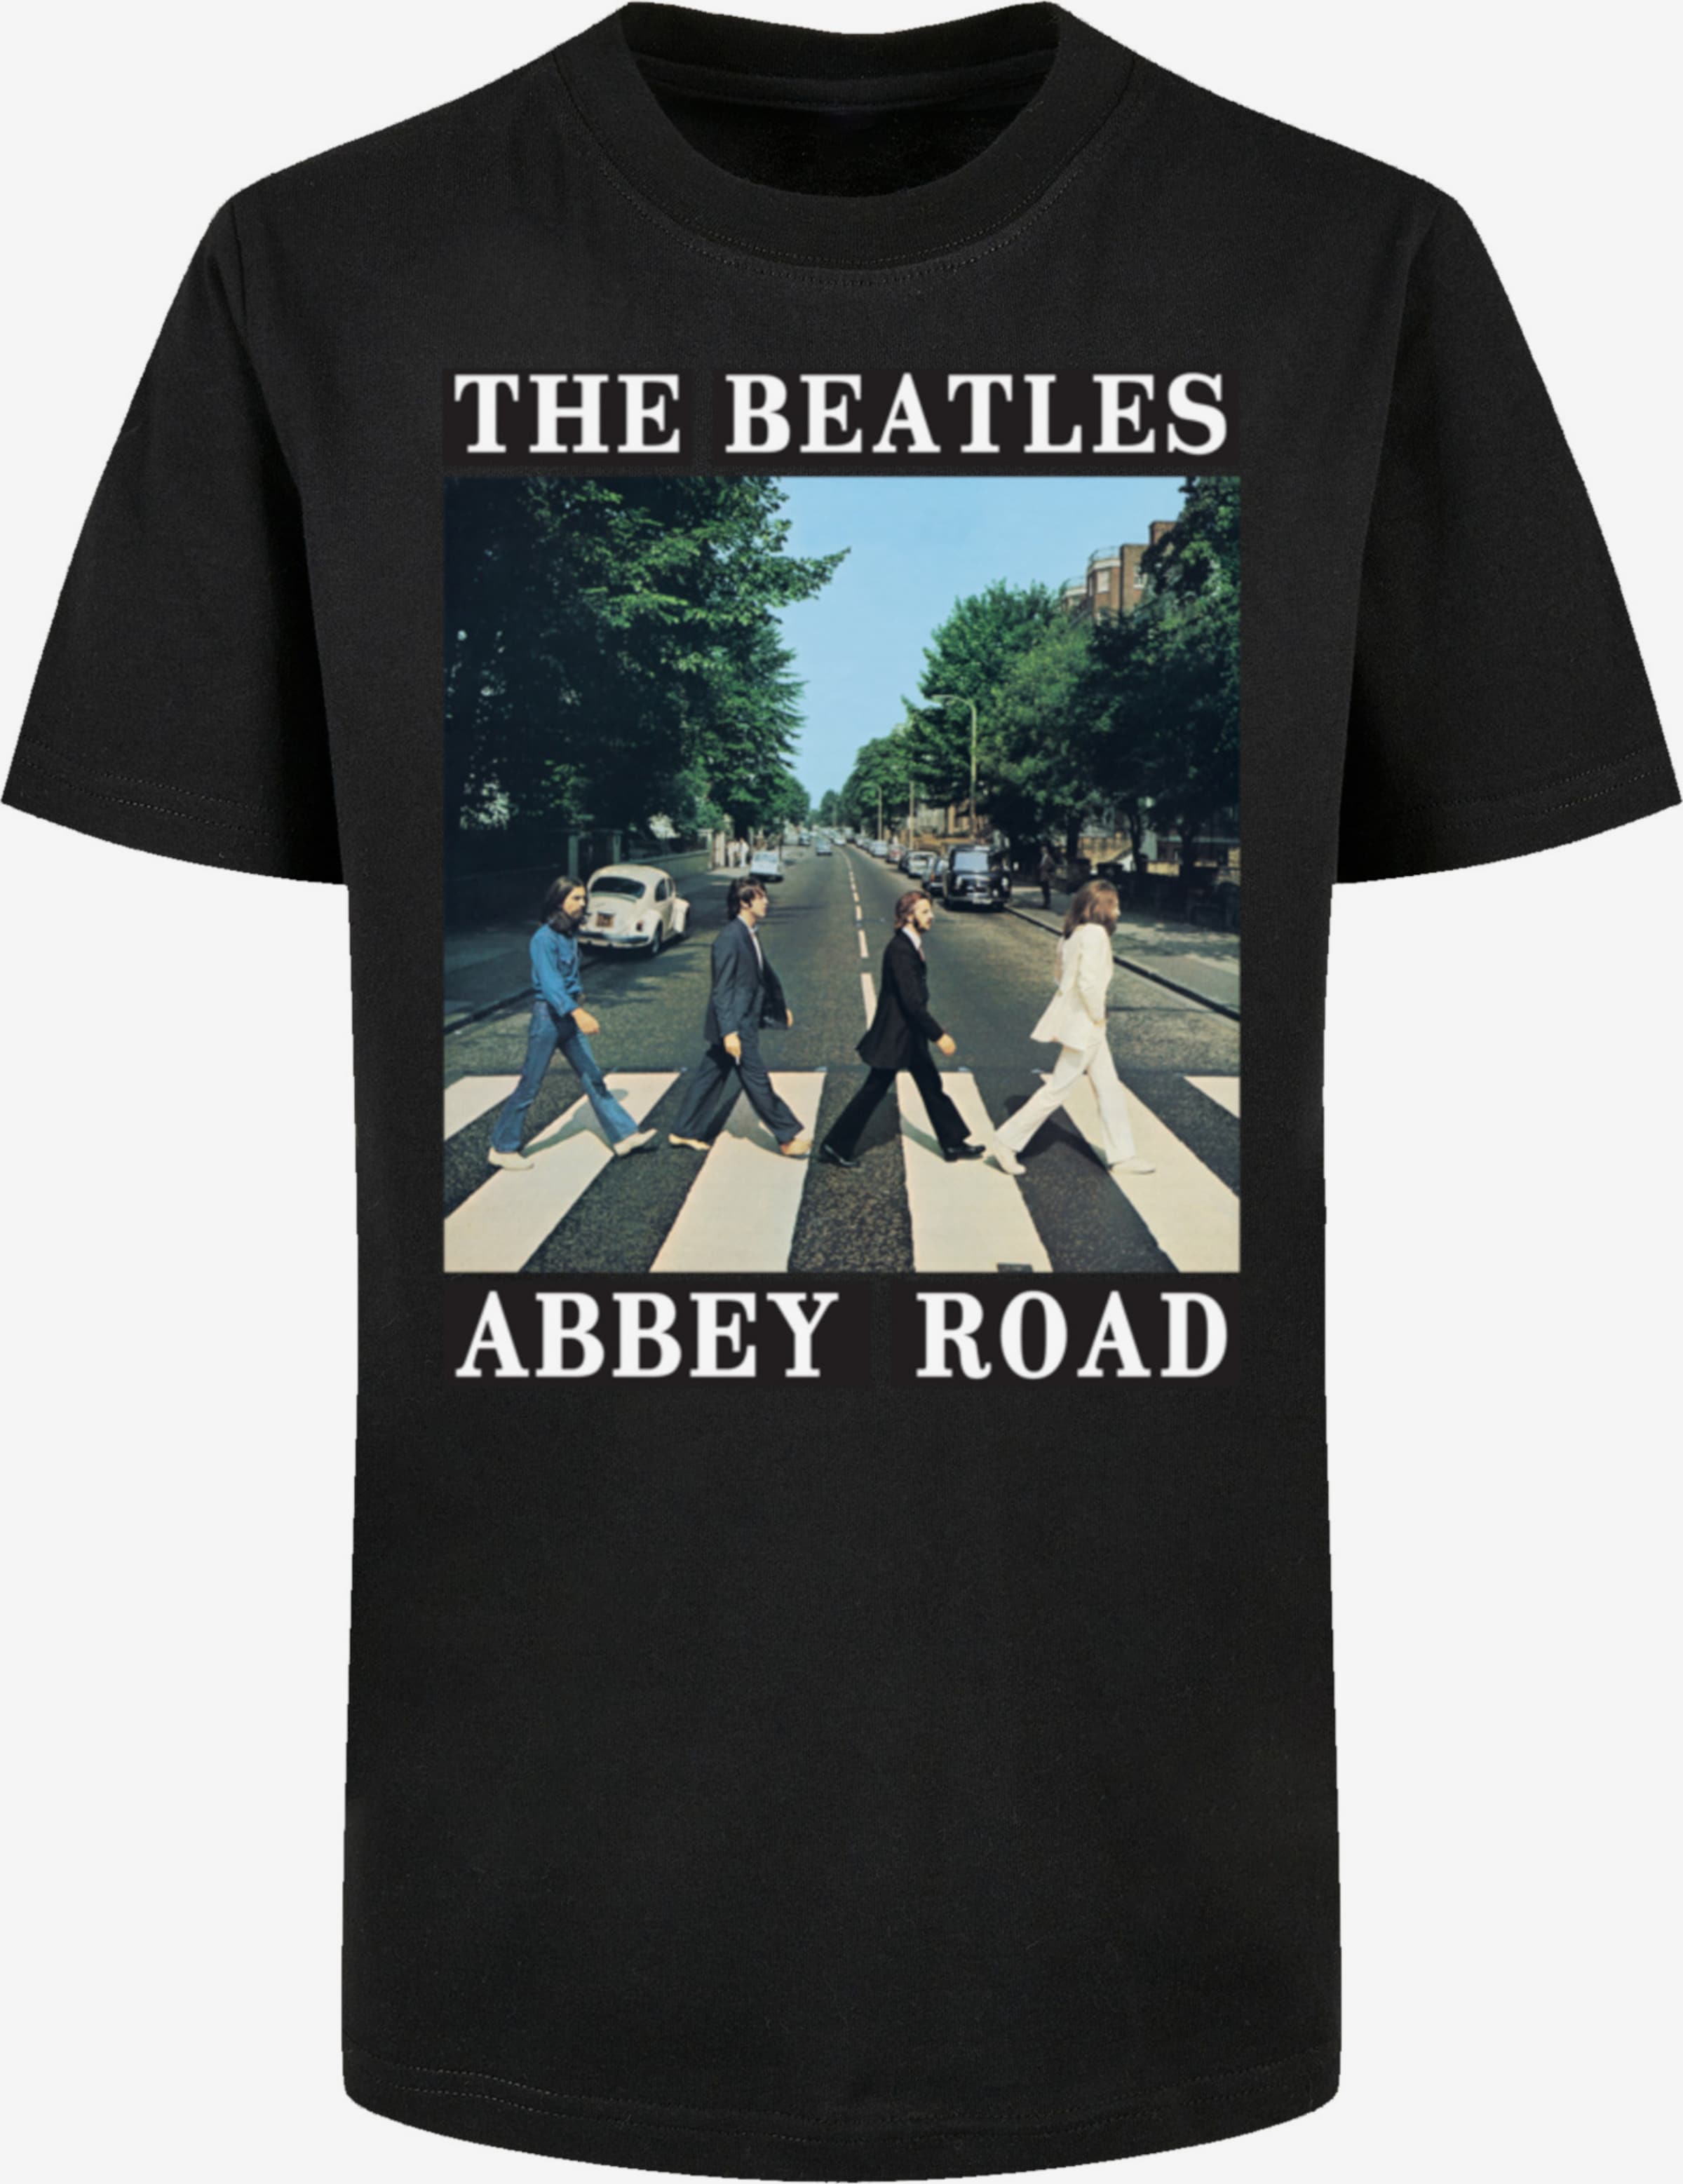 ABOUT Black Shirt in Abbey Beatles YOU \'The F4NT4STIC | Road\'